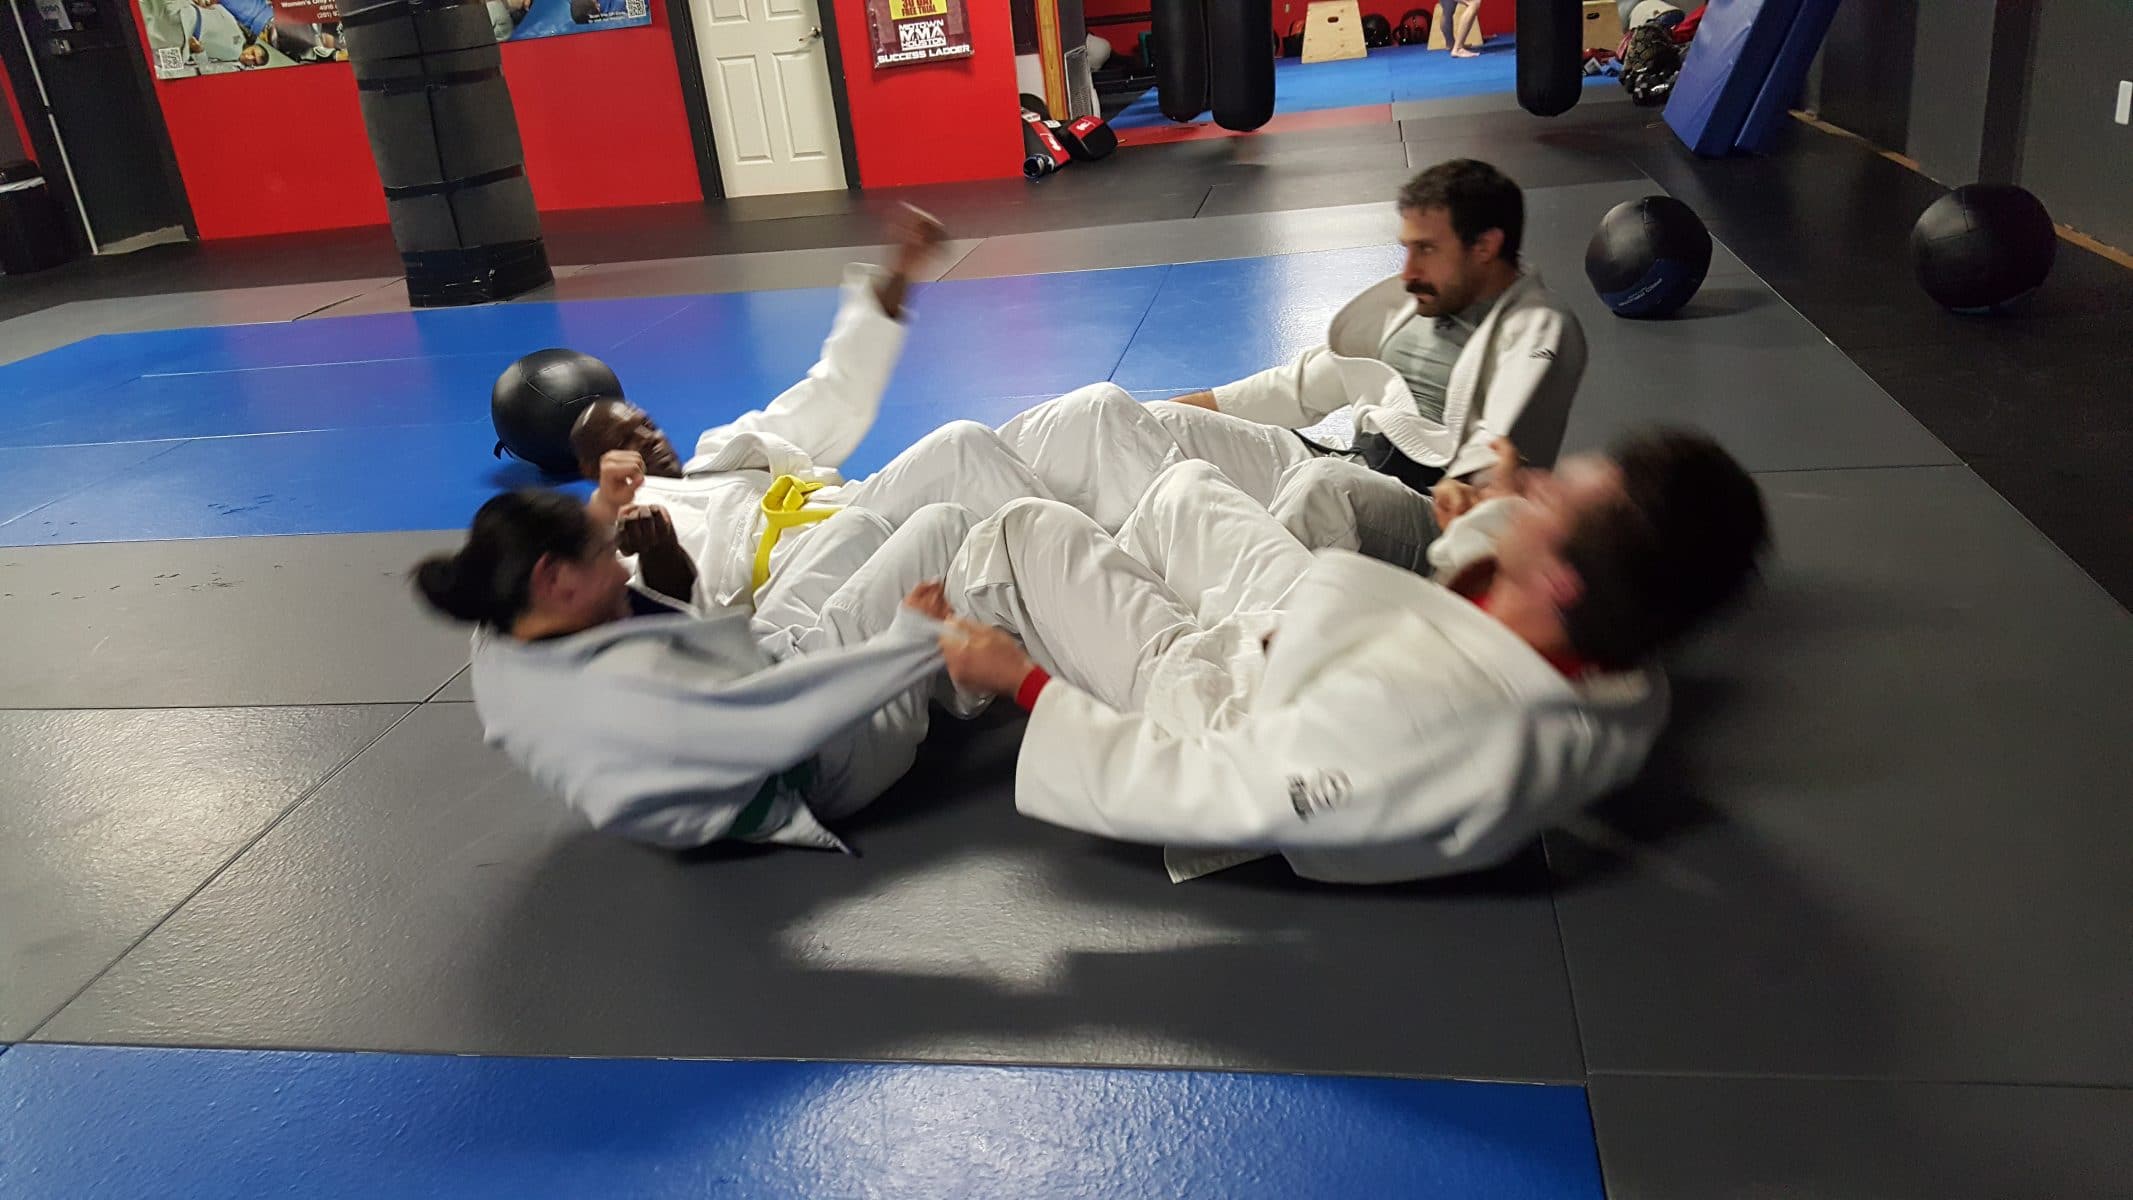 judo students doing sit-ups together